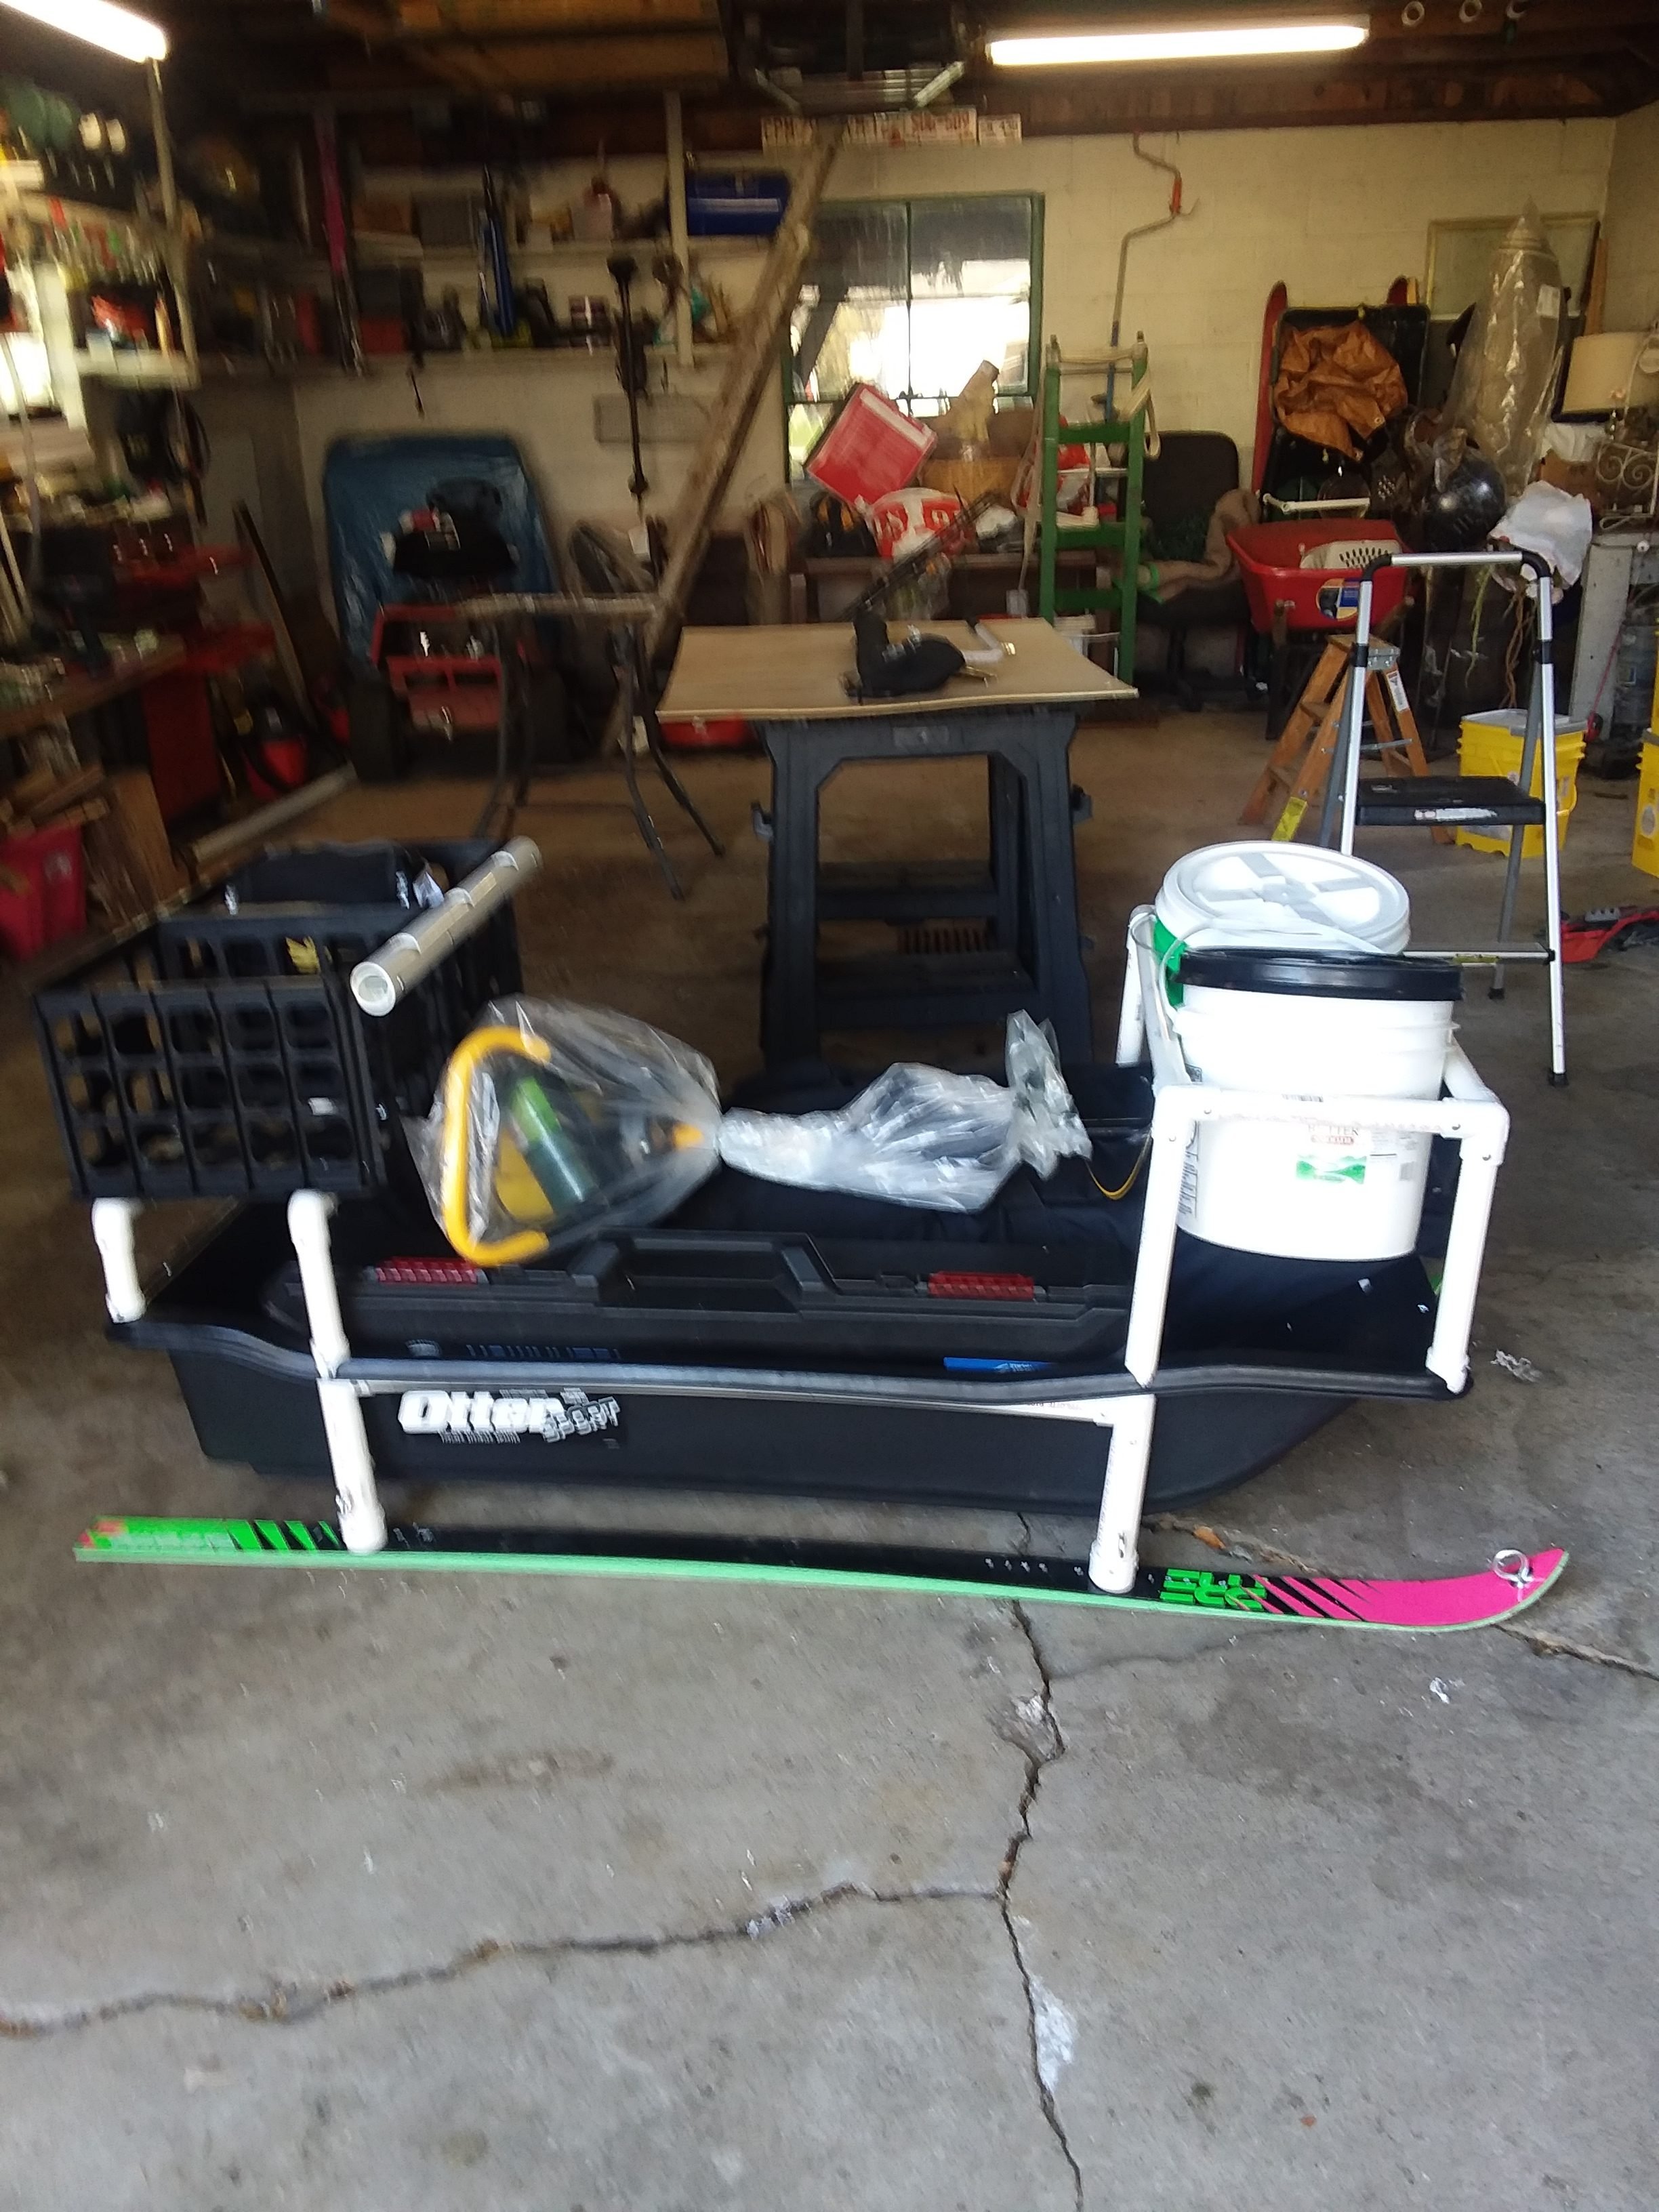 Reasonable Size & Weight for a Loaded Sled When Walking? - Ice Fishing  Forum - Ice Fishing Forum